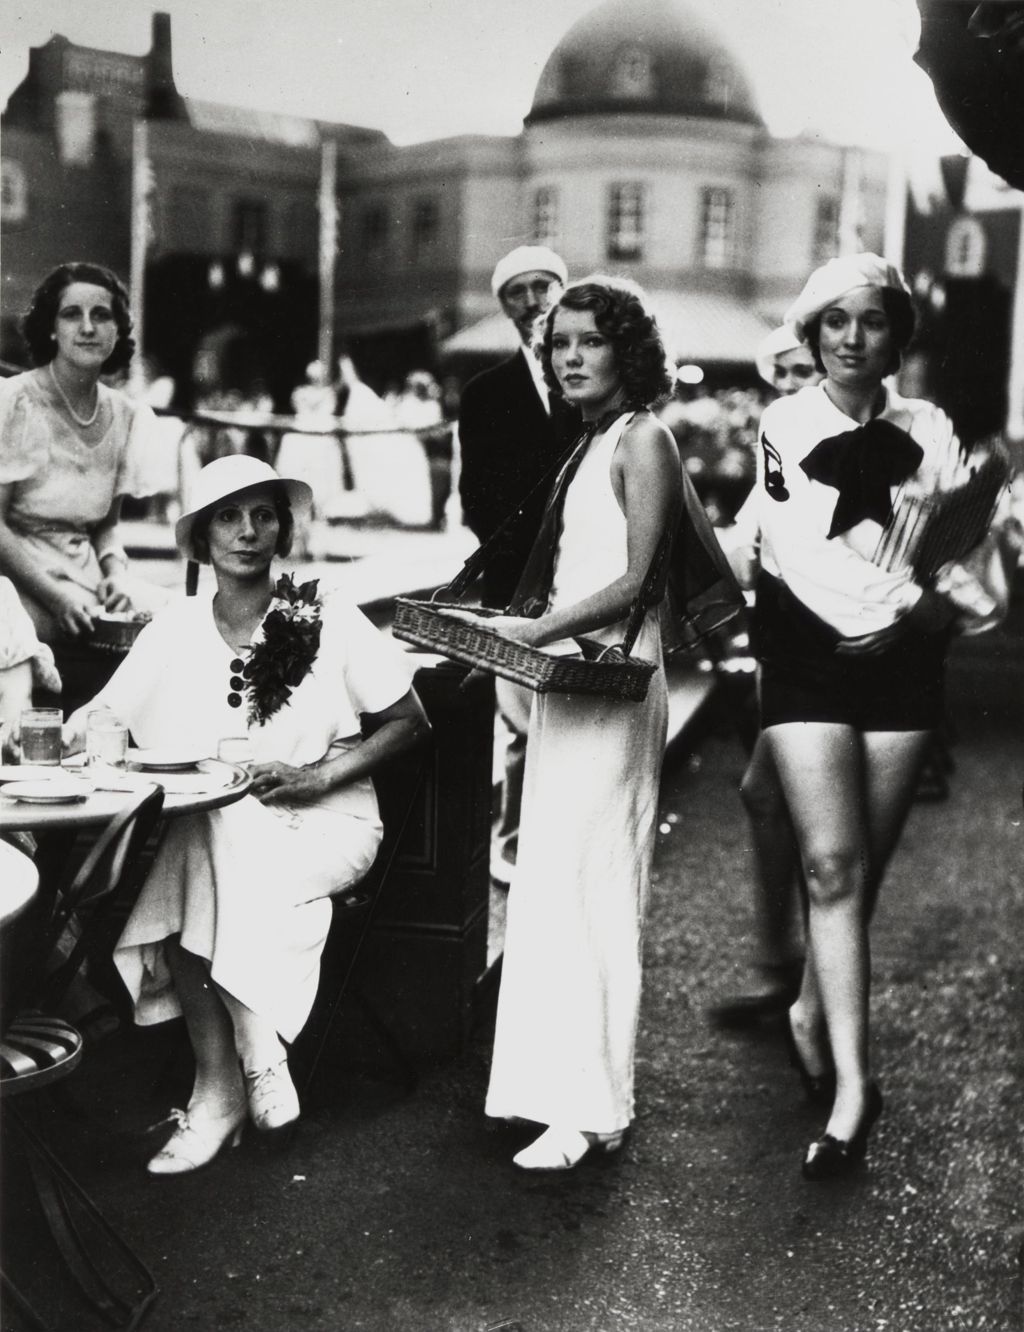 Miniature of Aimee Semple McPherson (seated on the left) at the Streets of Paris outdoor cafe